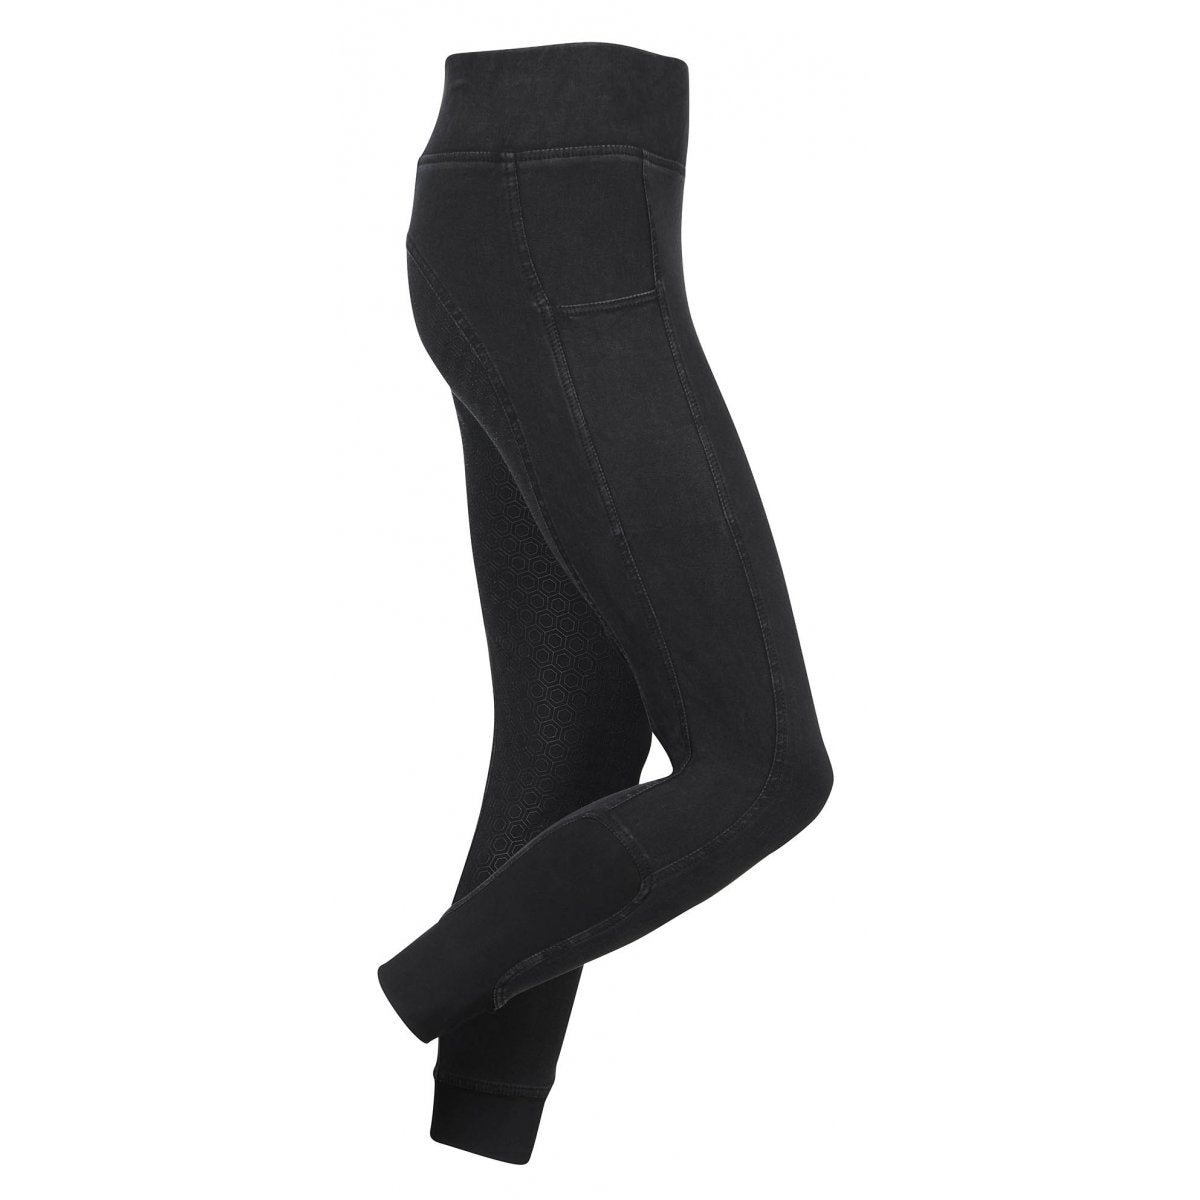 Black horse riding tights with knee patches on white background.